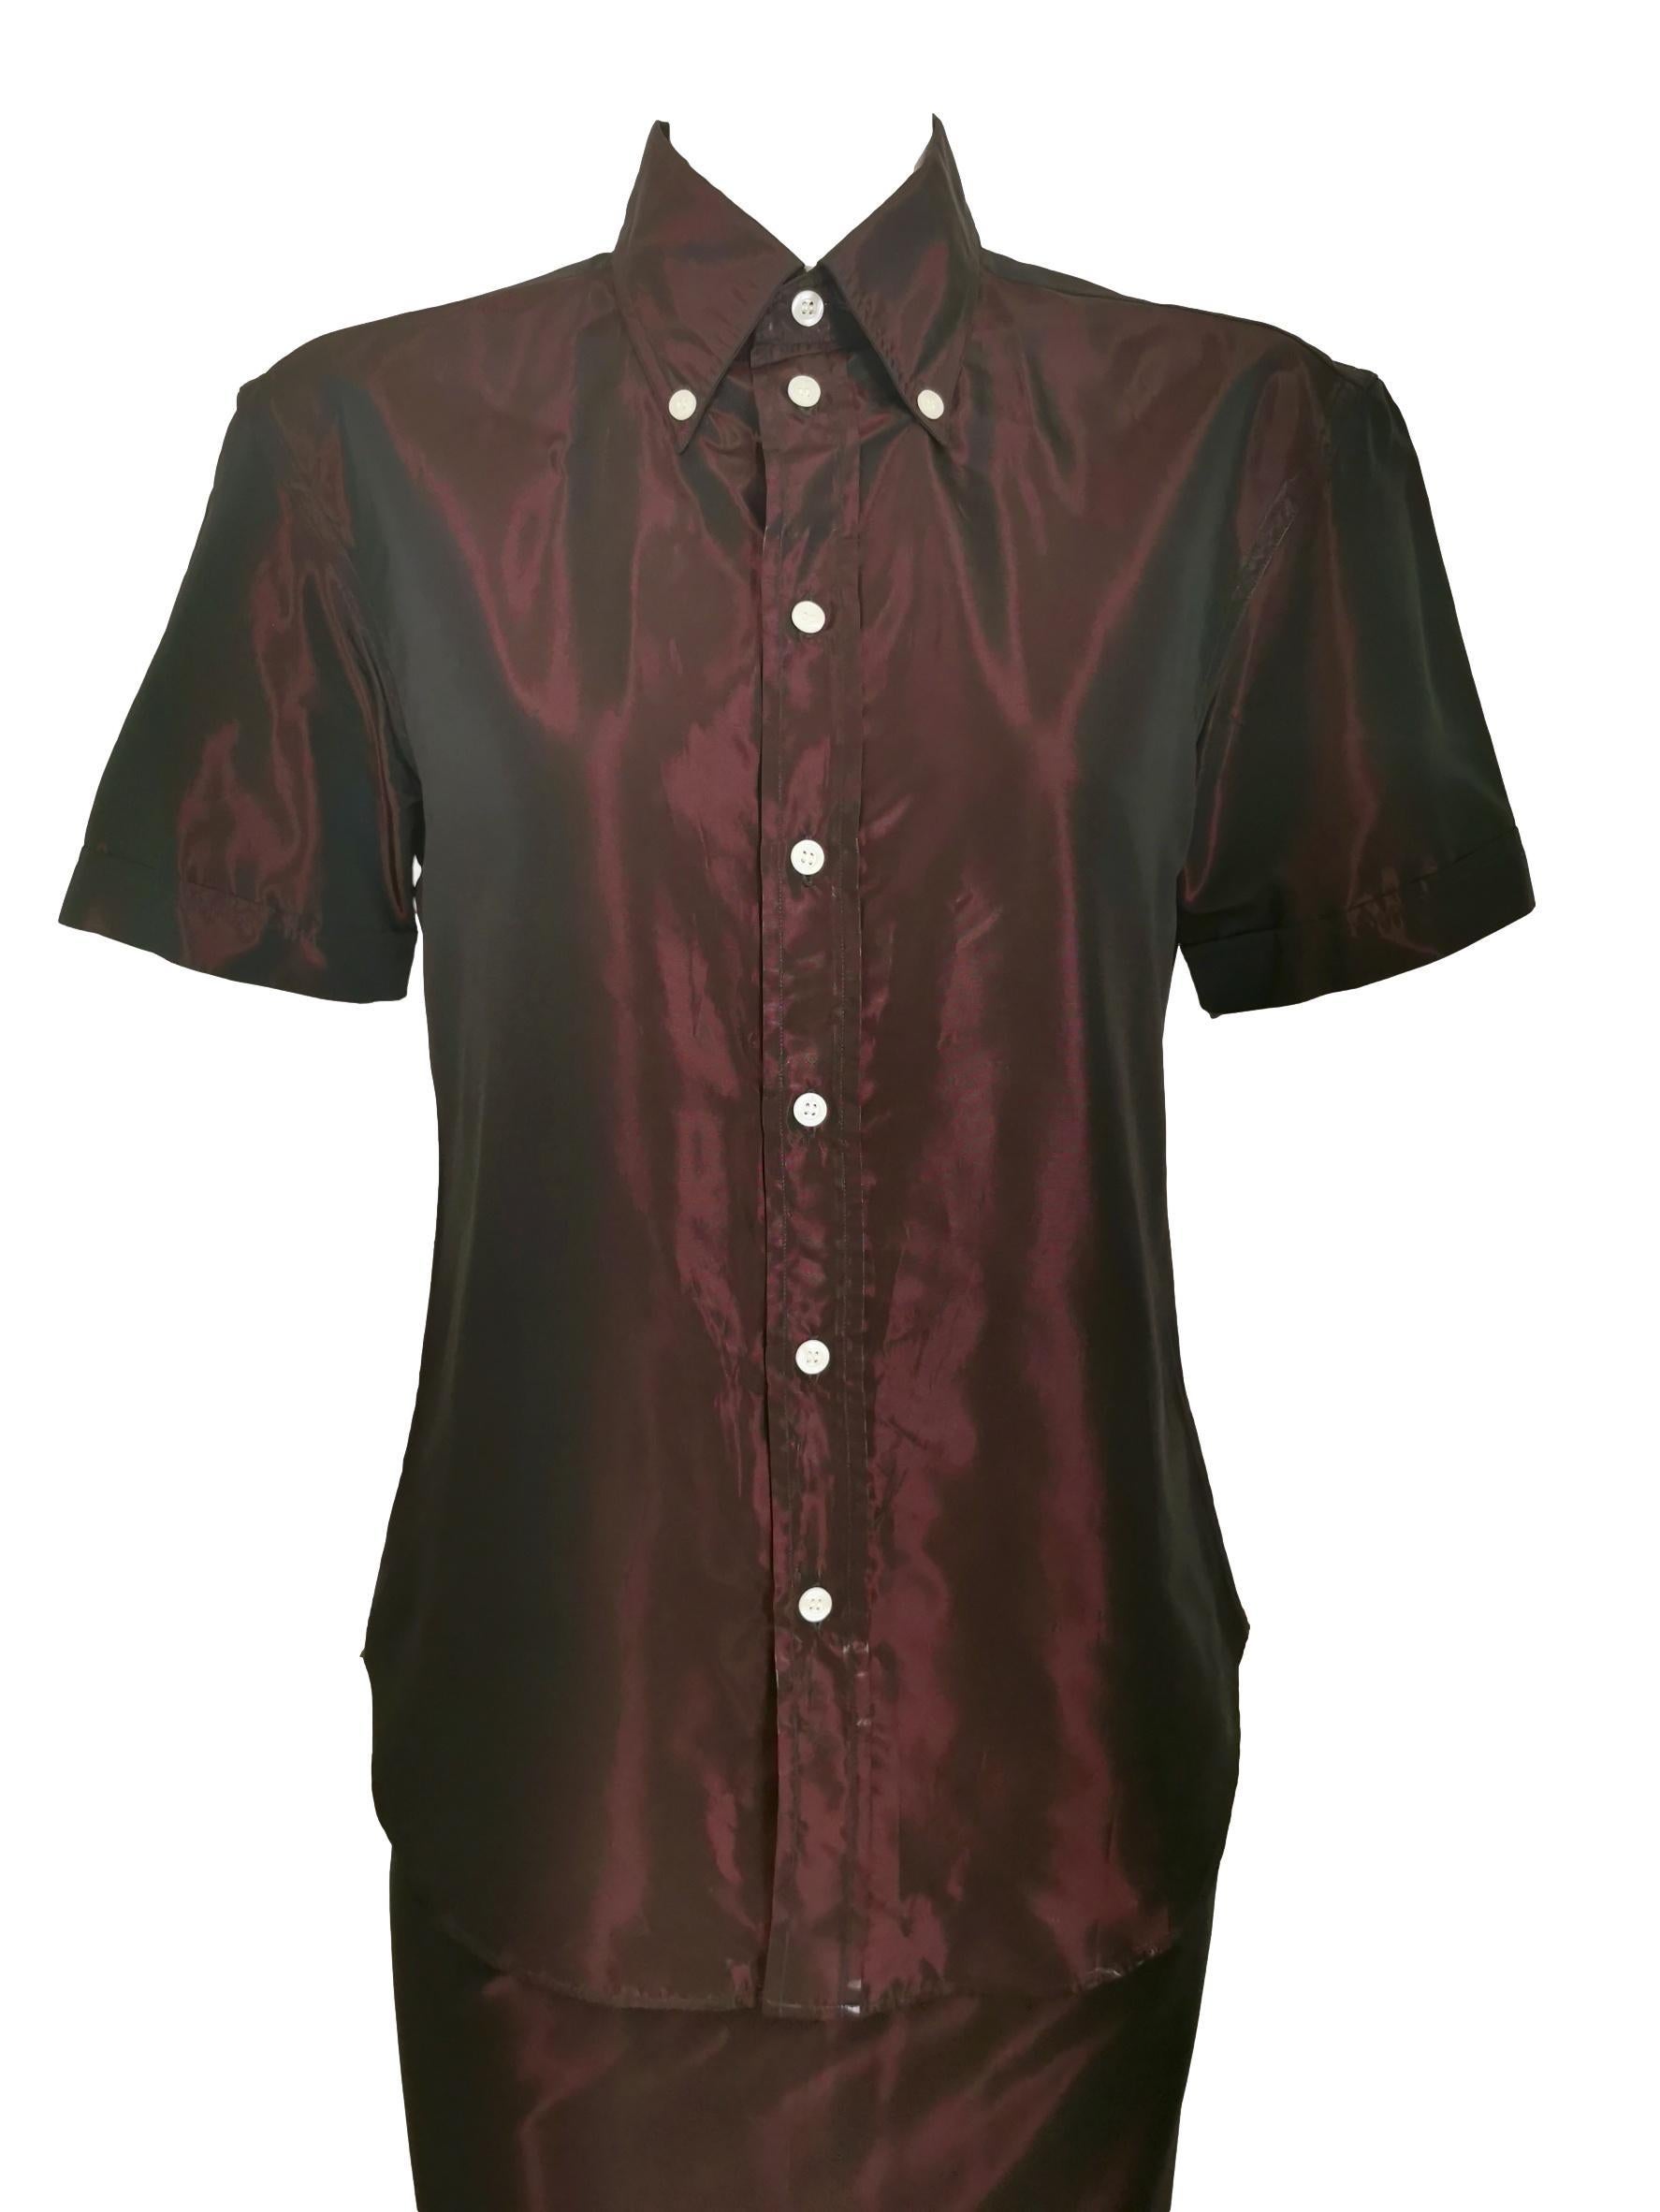 Alexander McQueen Two Tone Fitted Shirt 1996 In Excellent Condition For Sale In Bath, GB